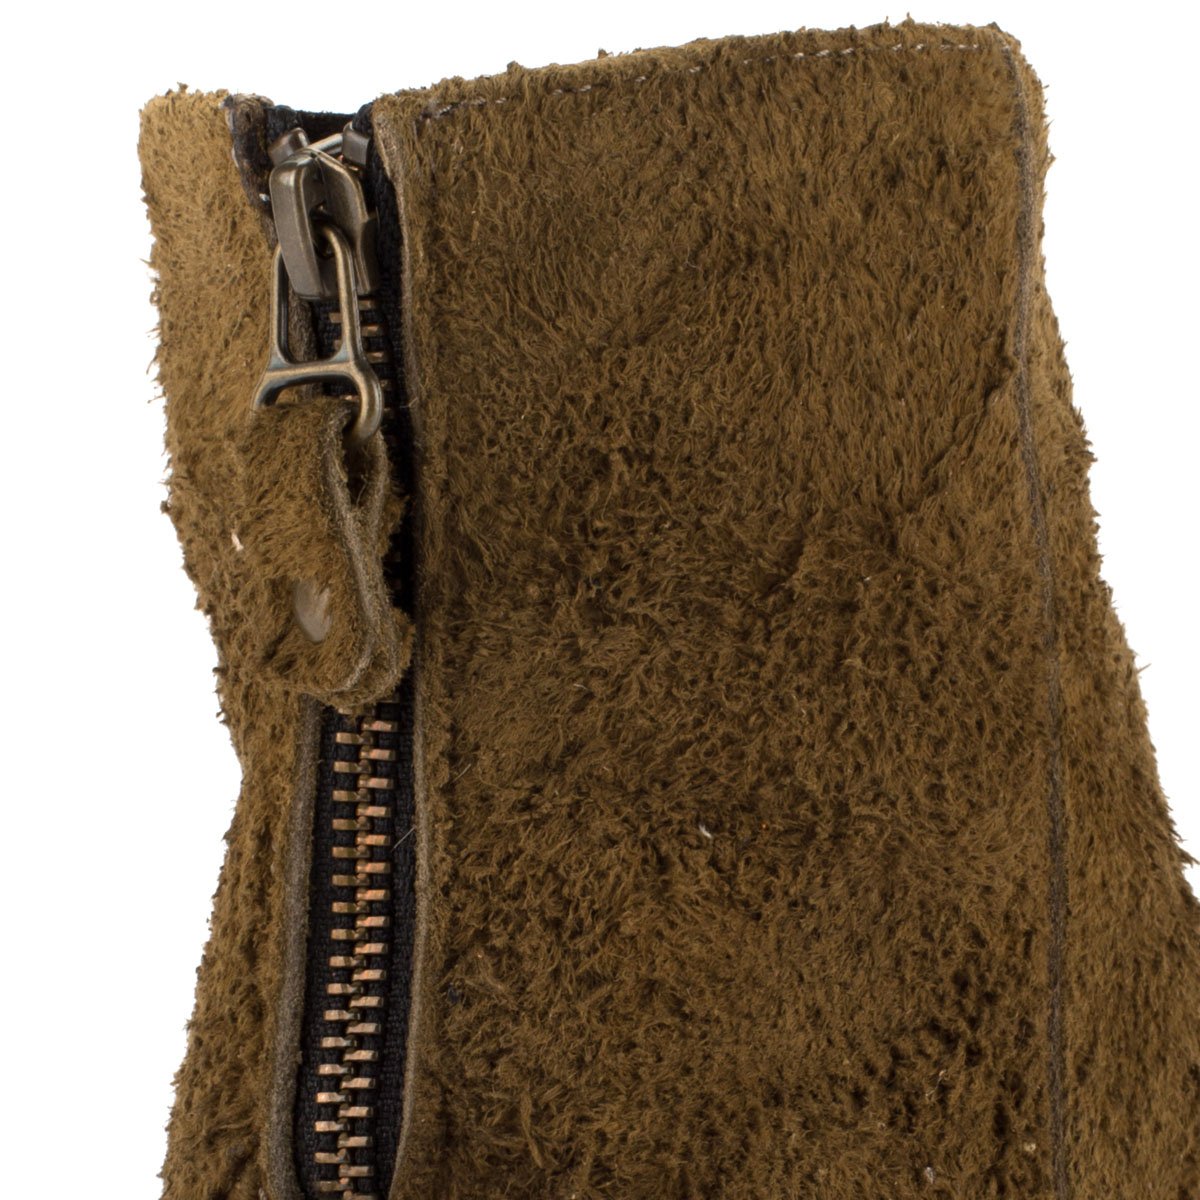 TEXAS 03 ROUGH SUEDE BOOTS – Moss